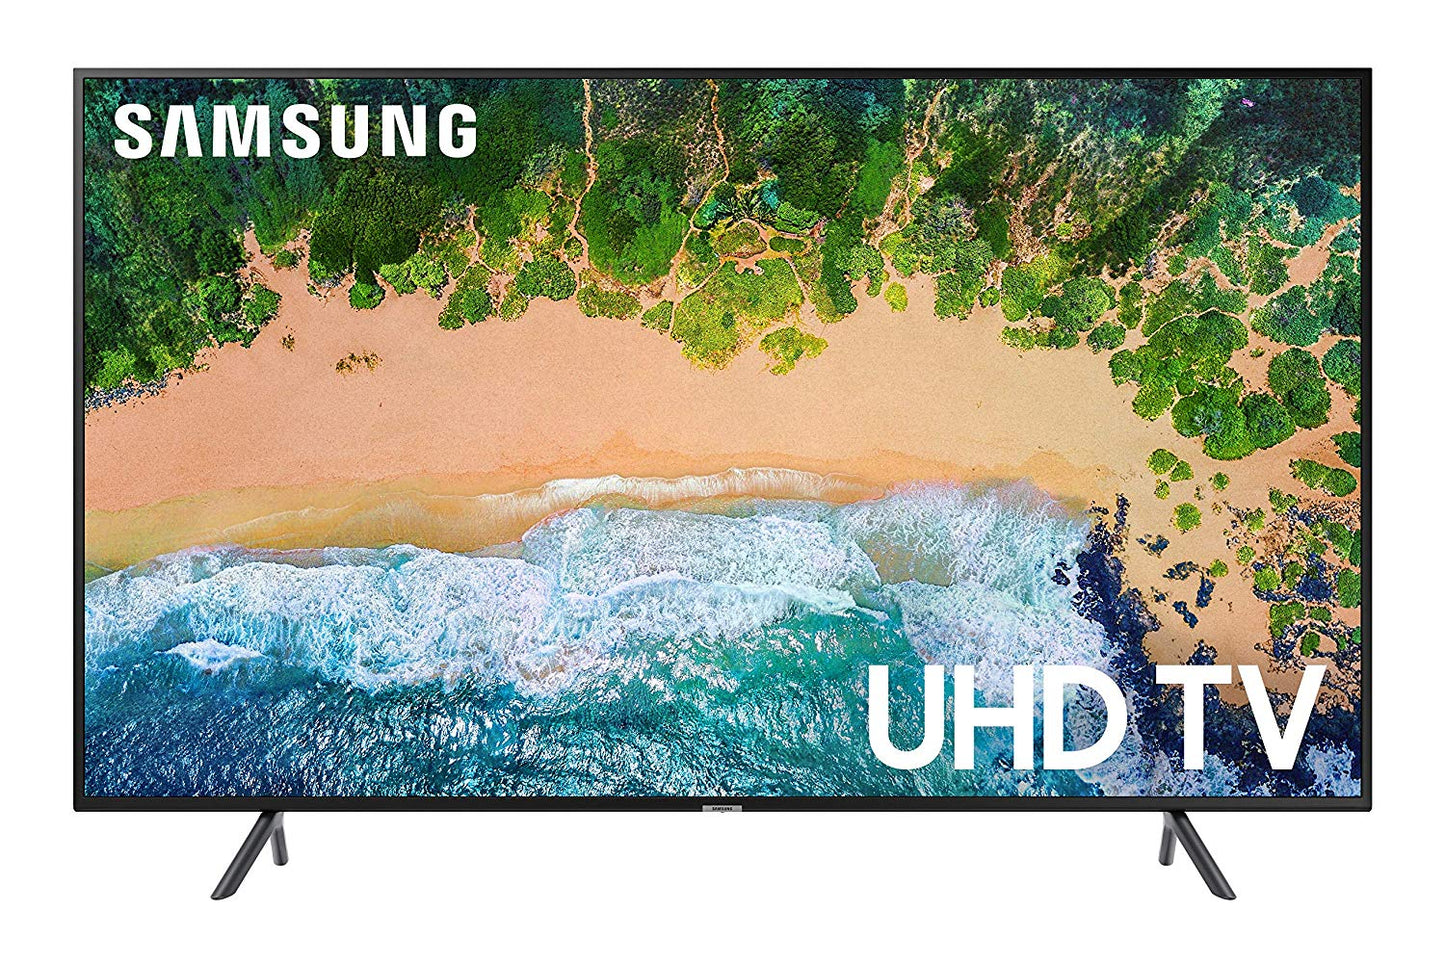 Samsung UN65NU6900 65-in HDR UHD Smart LED TV - 2018